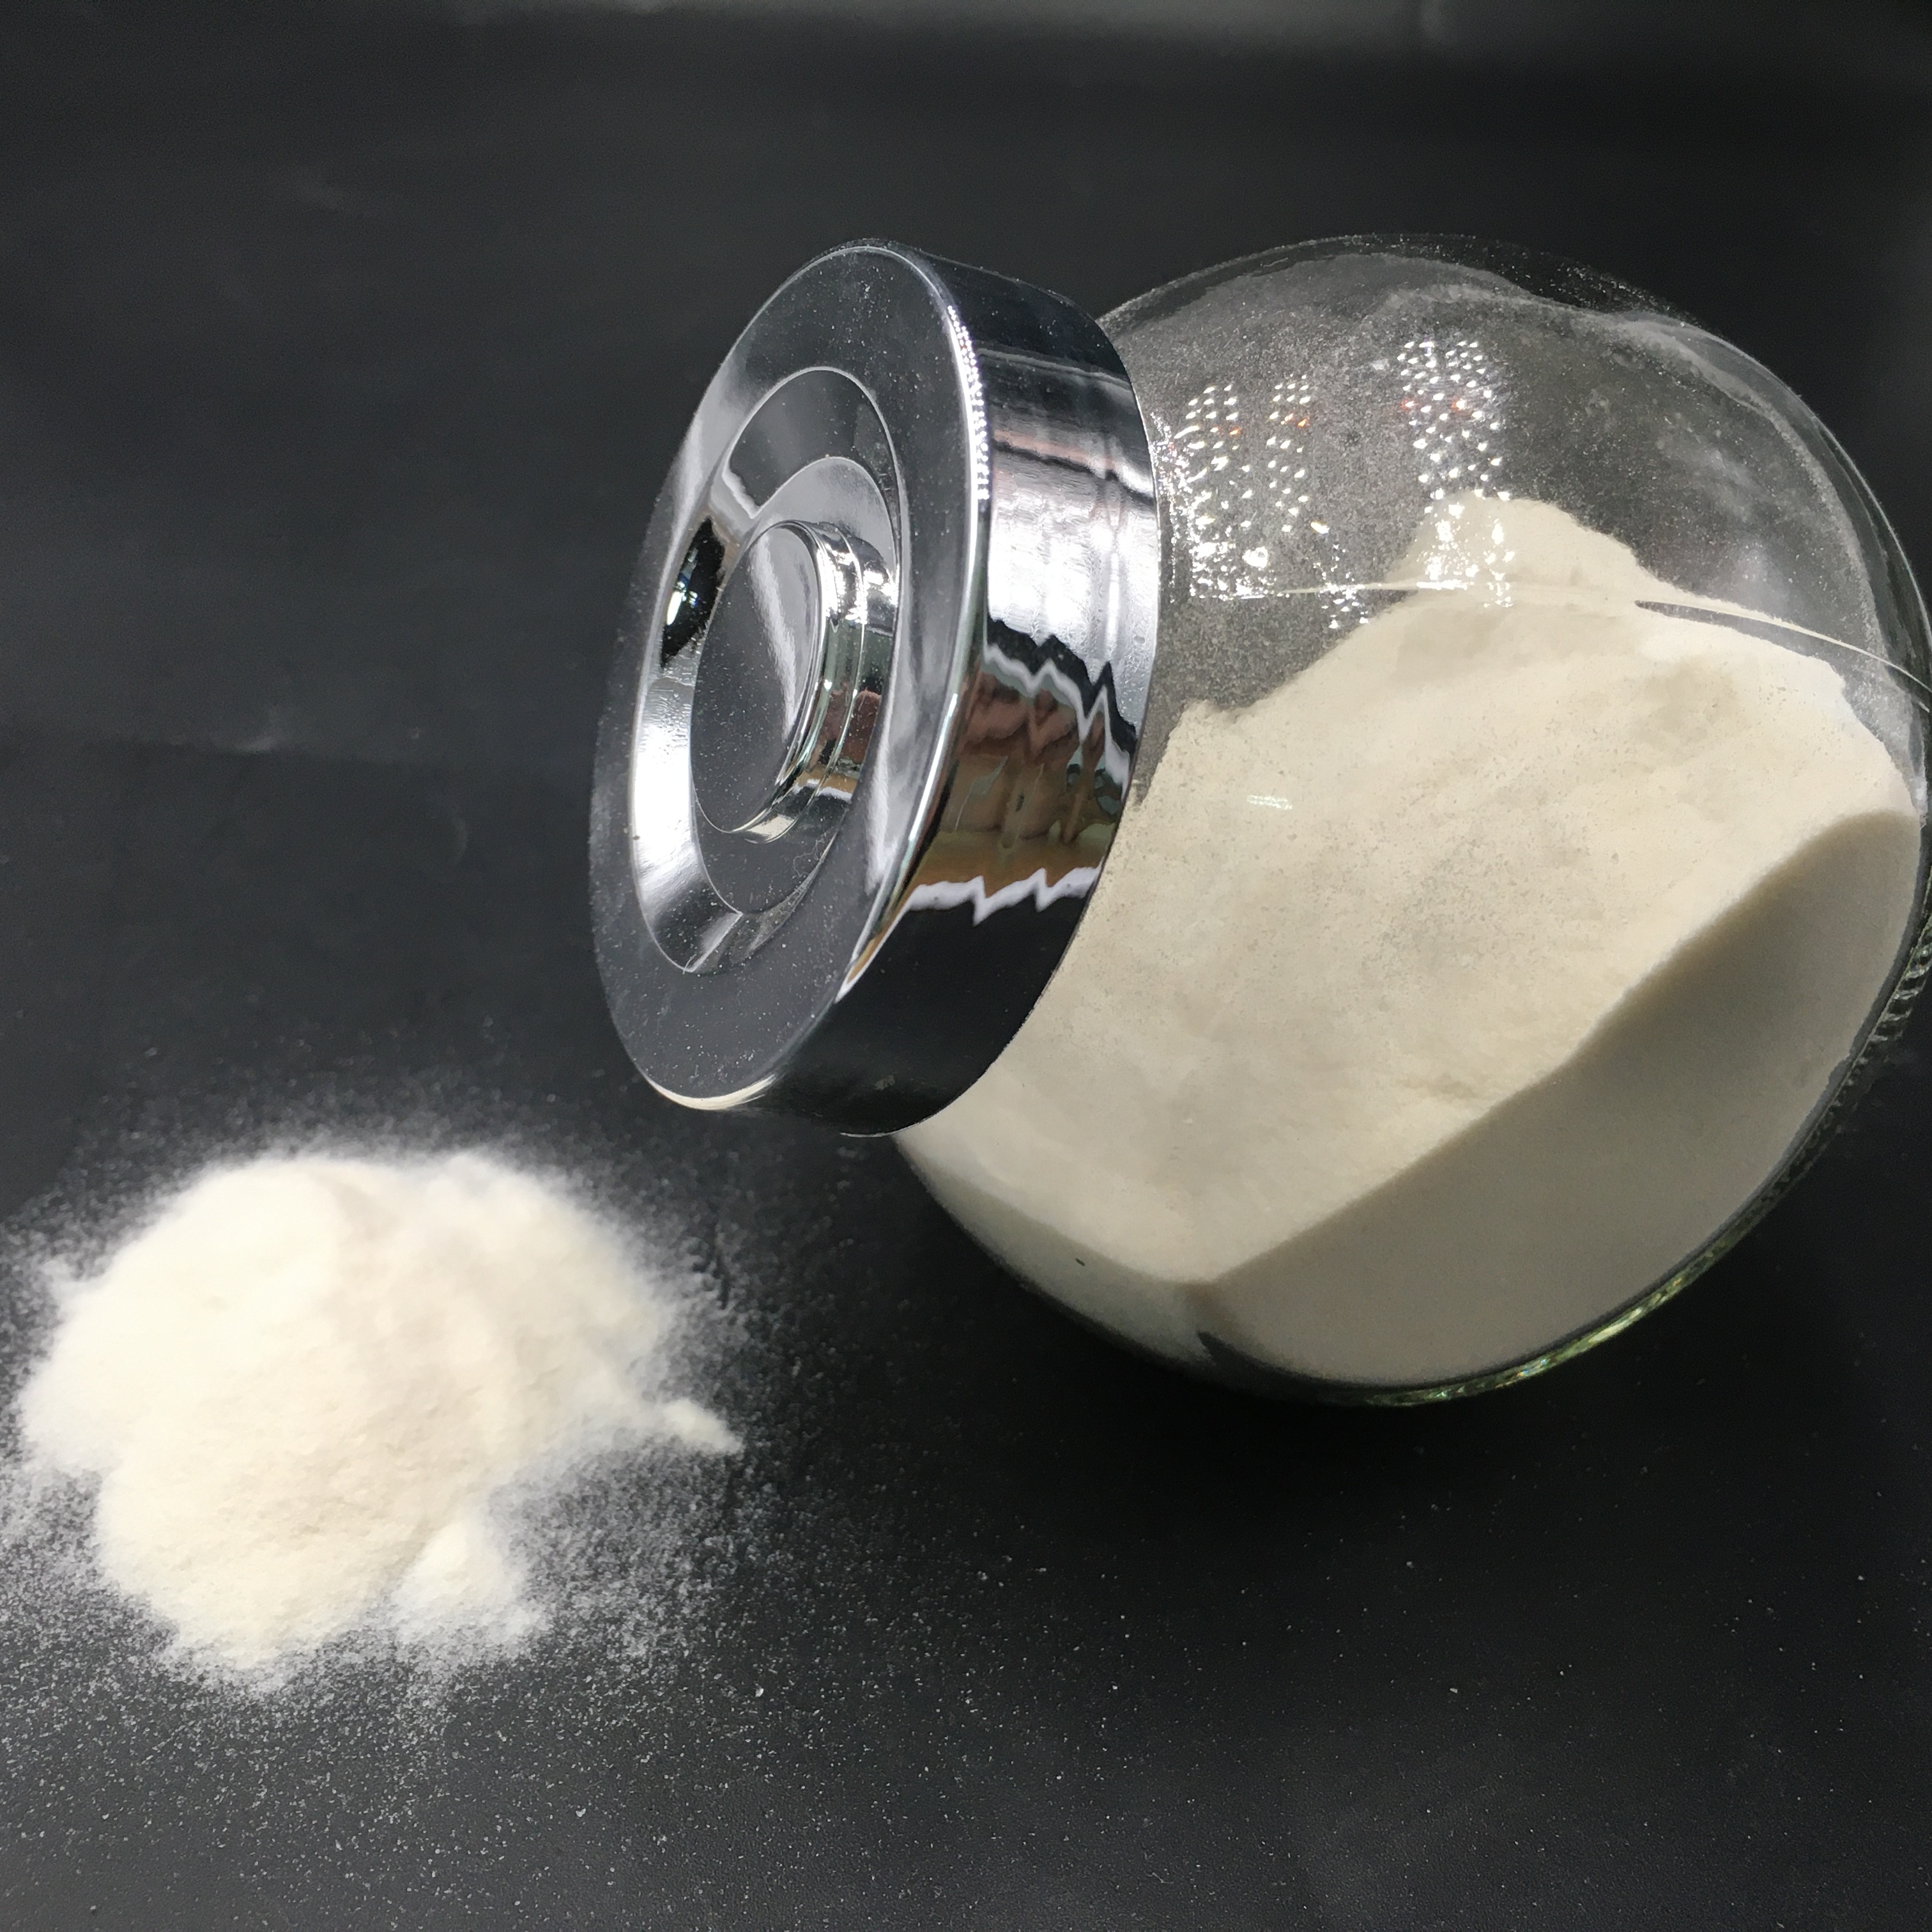 Hot Sale agar agar pahramceutical grade with Reasonable Price Stabilizer Best Top Thicker Soft Candy Powder Stabilization Natural CAS No. 9002-18-0